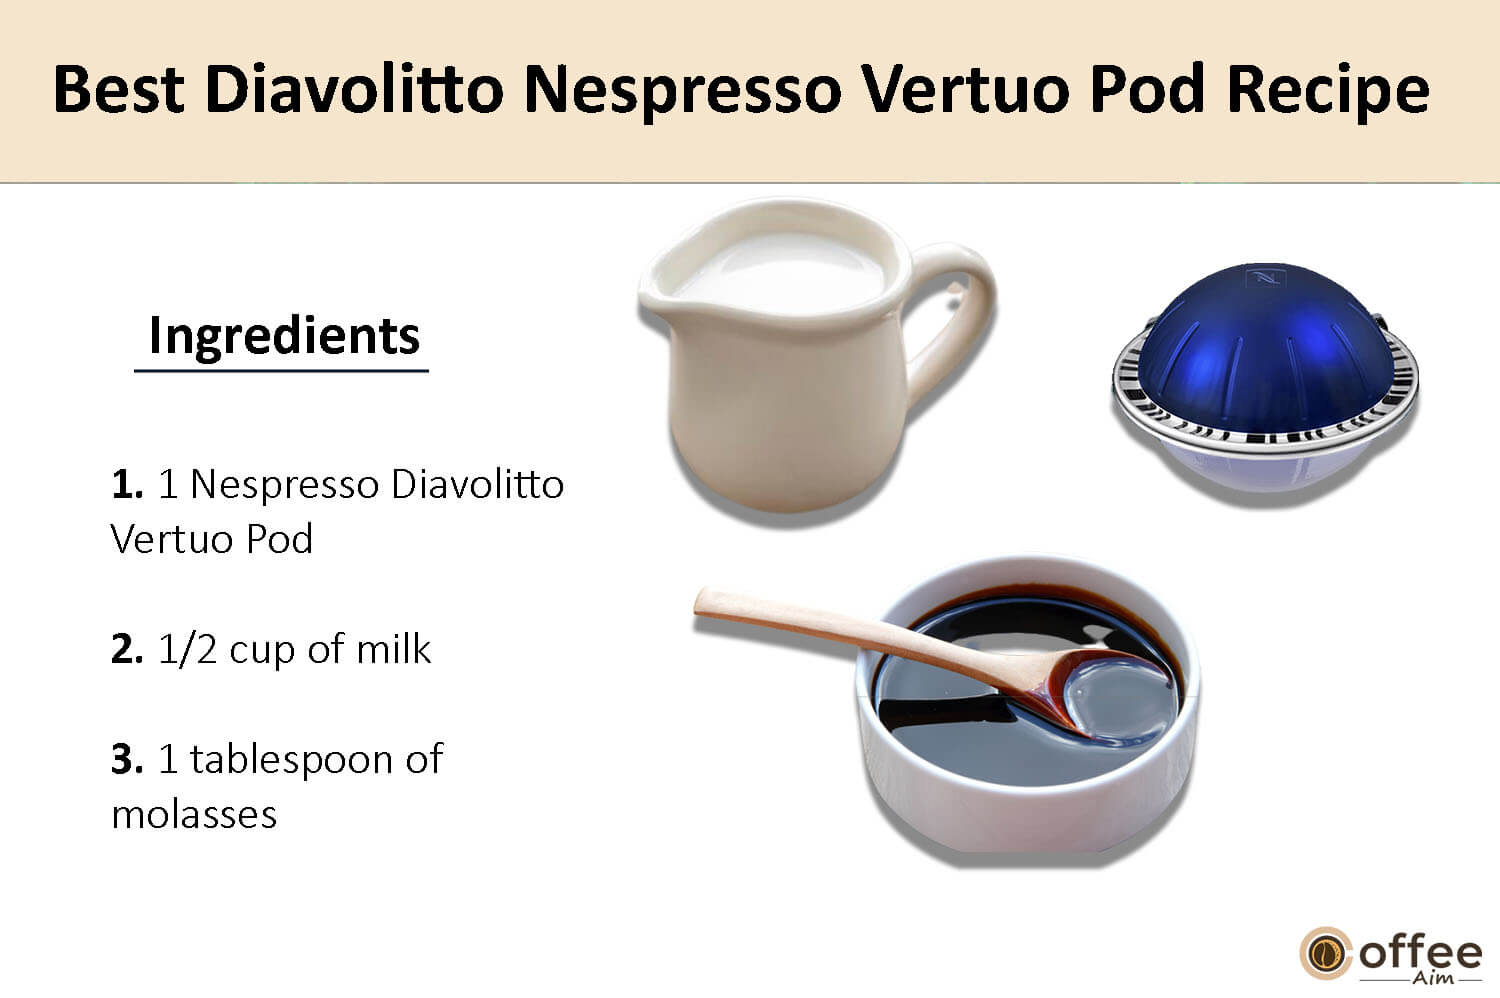 In this image, I elucidate the components that comprise the finest Diavolitto Nespresso Vertuo coffee pod.